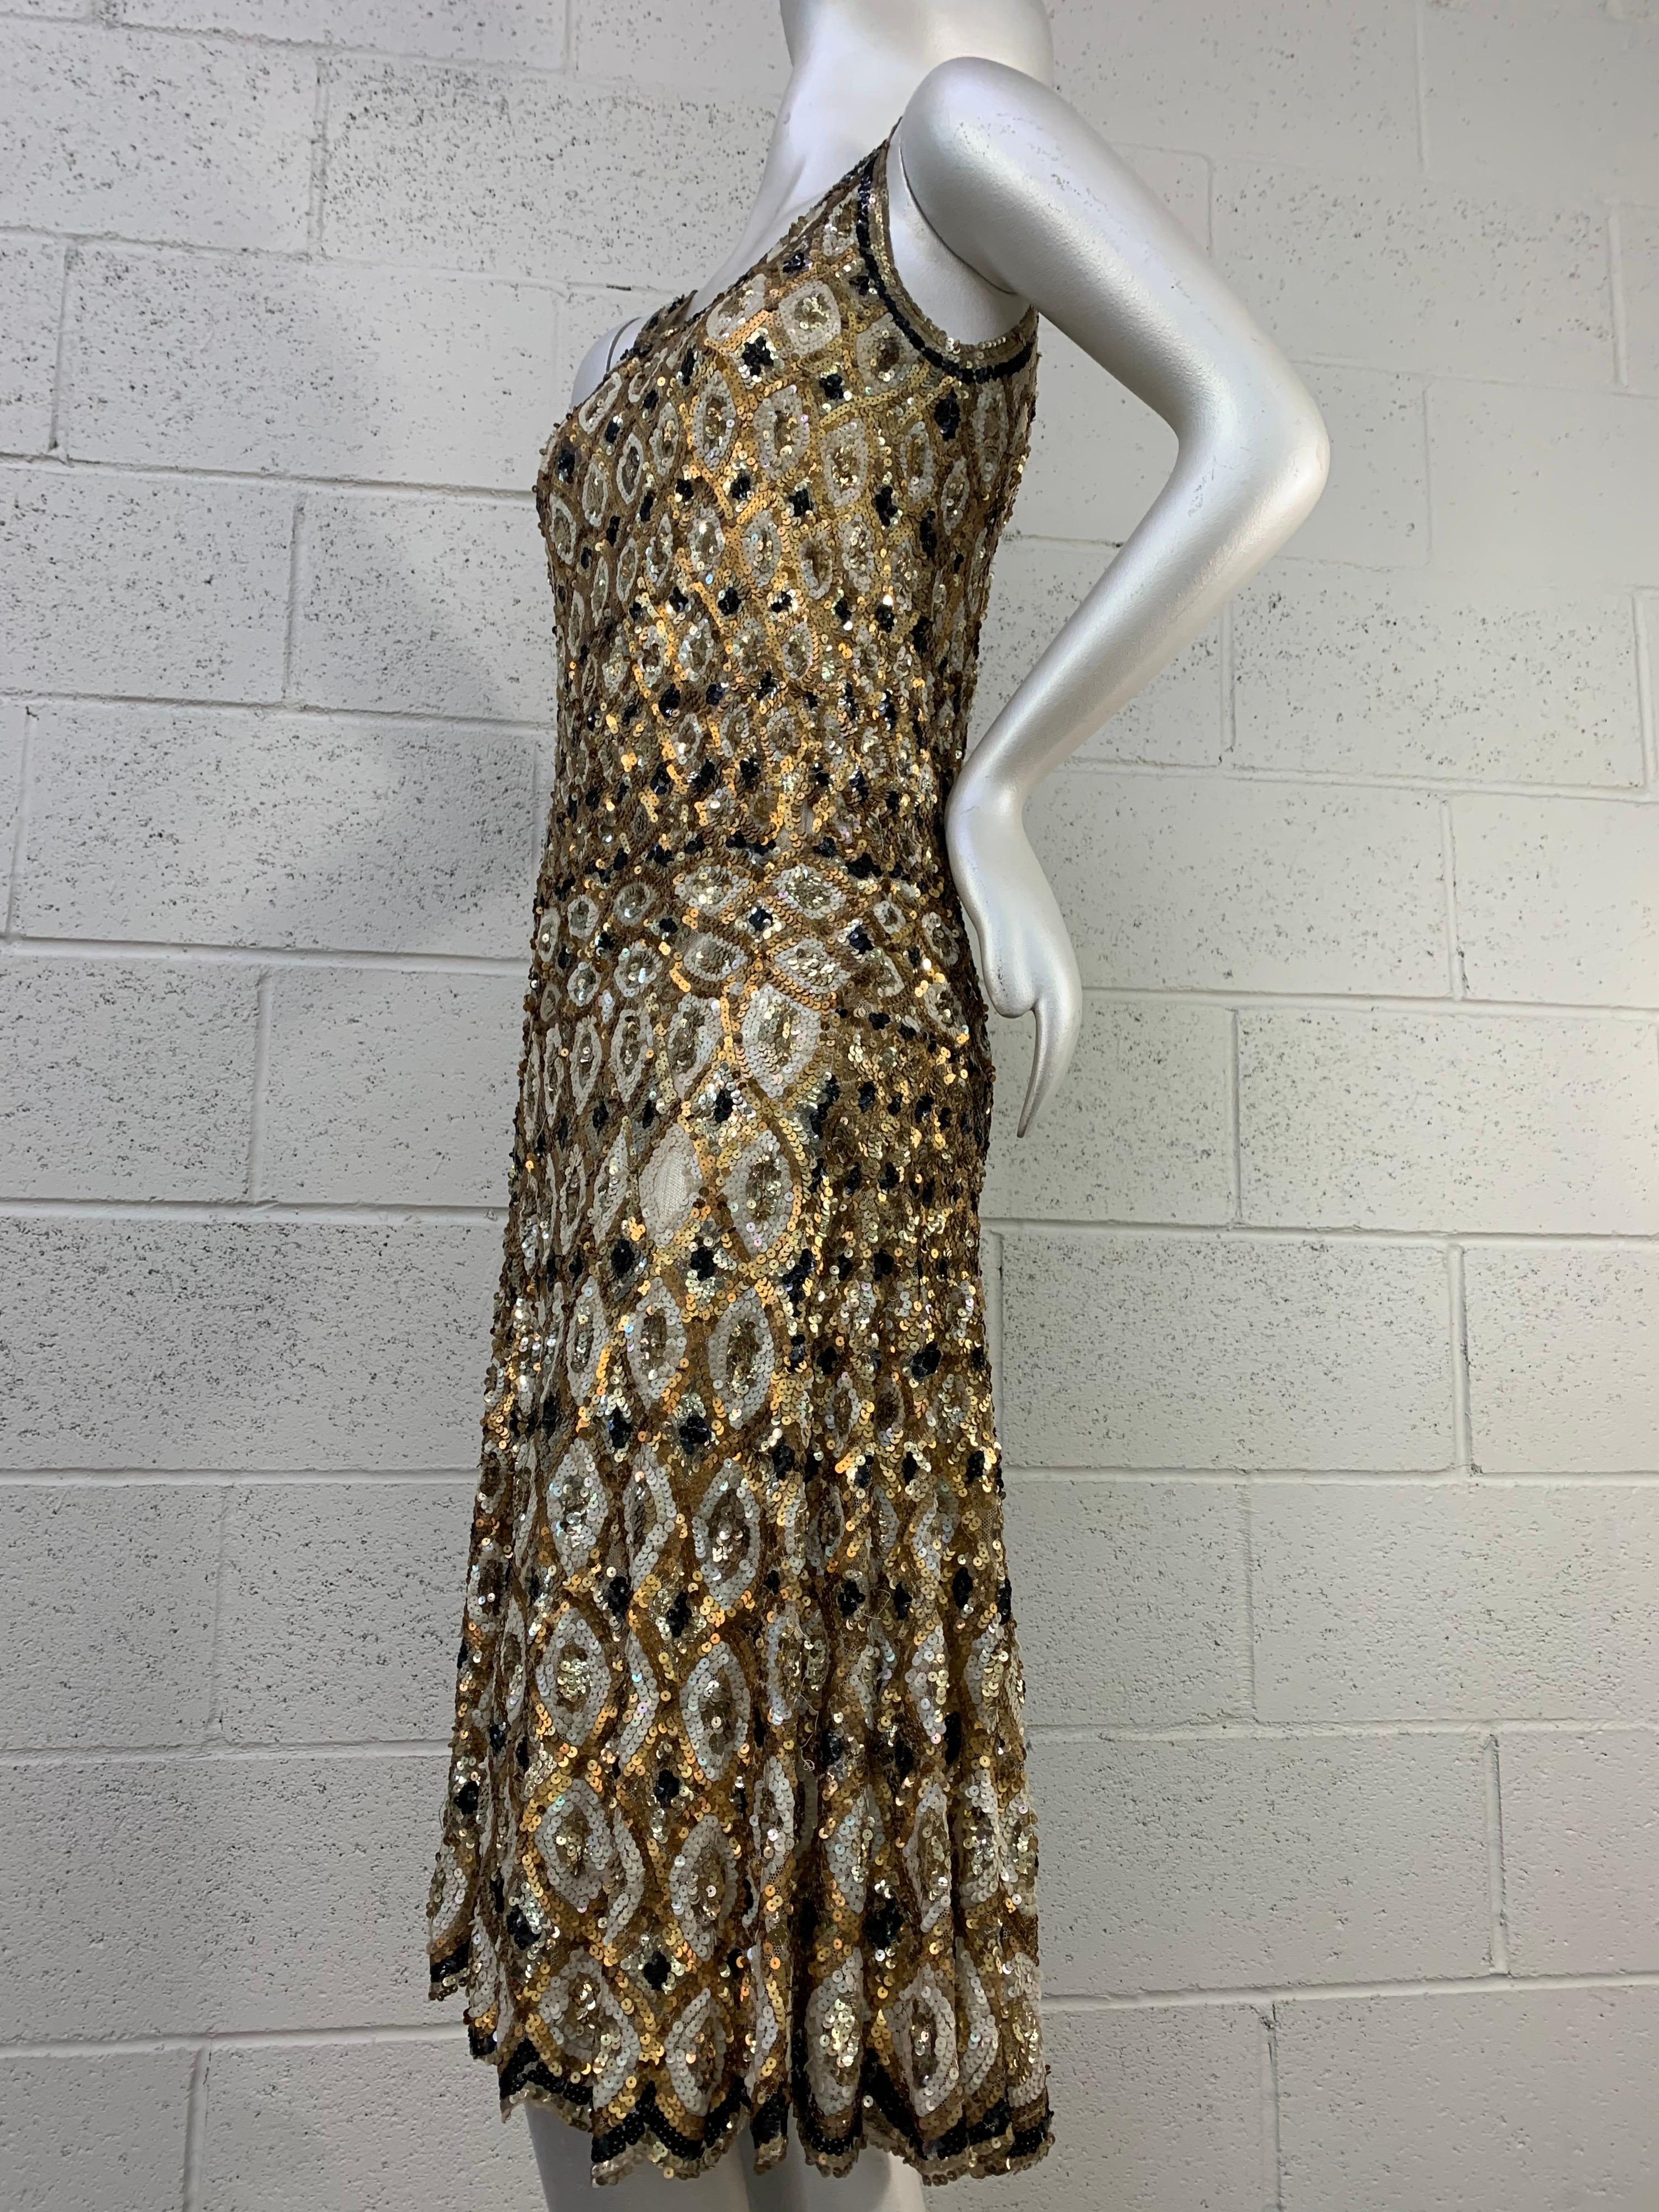 A truly spectacular 1920s French-made Art Deco styled harlequin patterned sequin dancing dress in gold and black. Very full skirt with dropped, banded waist for lots of movement. Diamond pattern on silk net is graduated from larger at bottom to